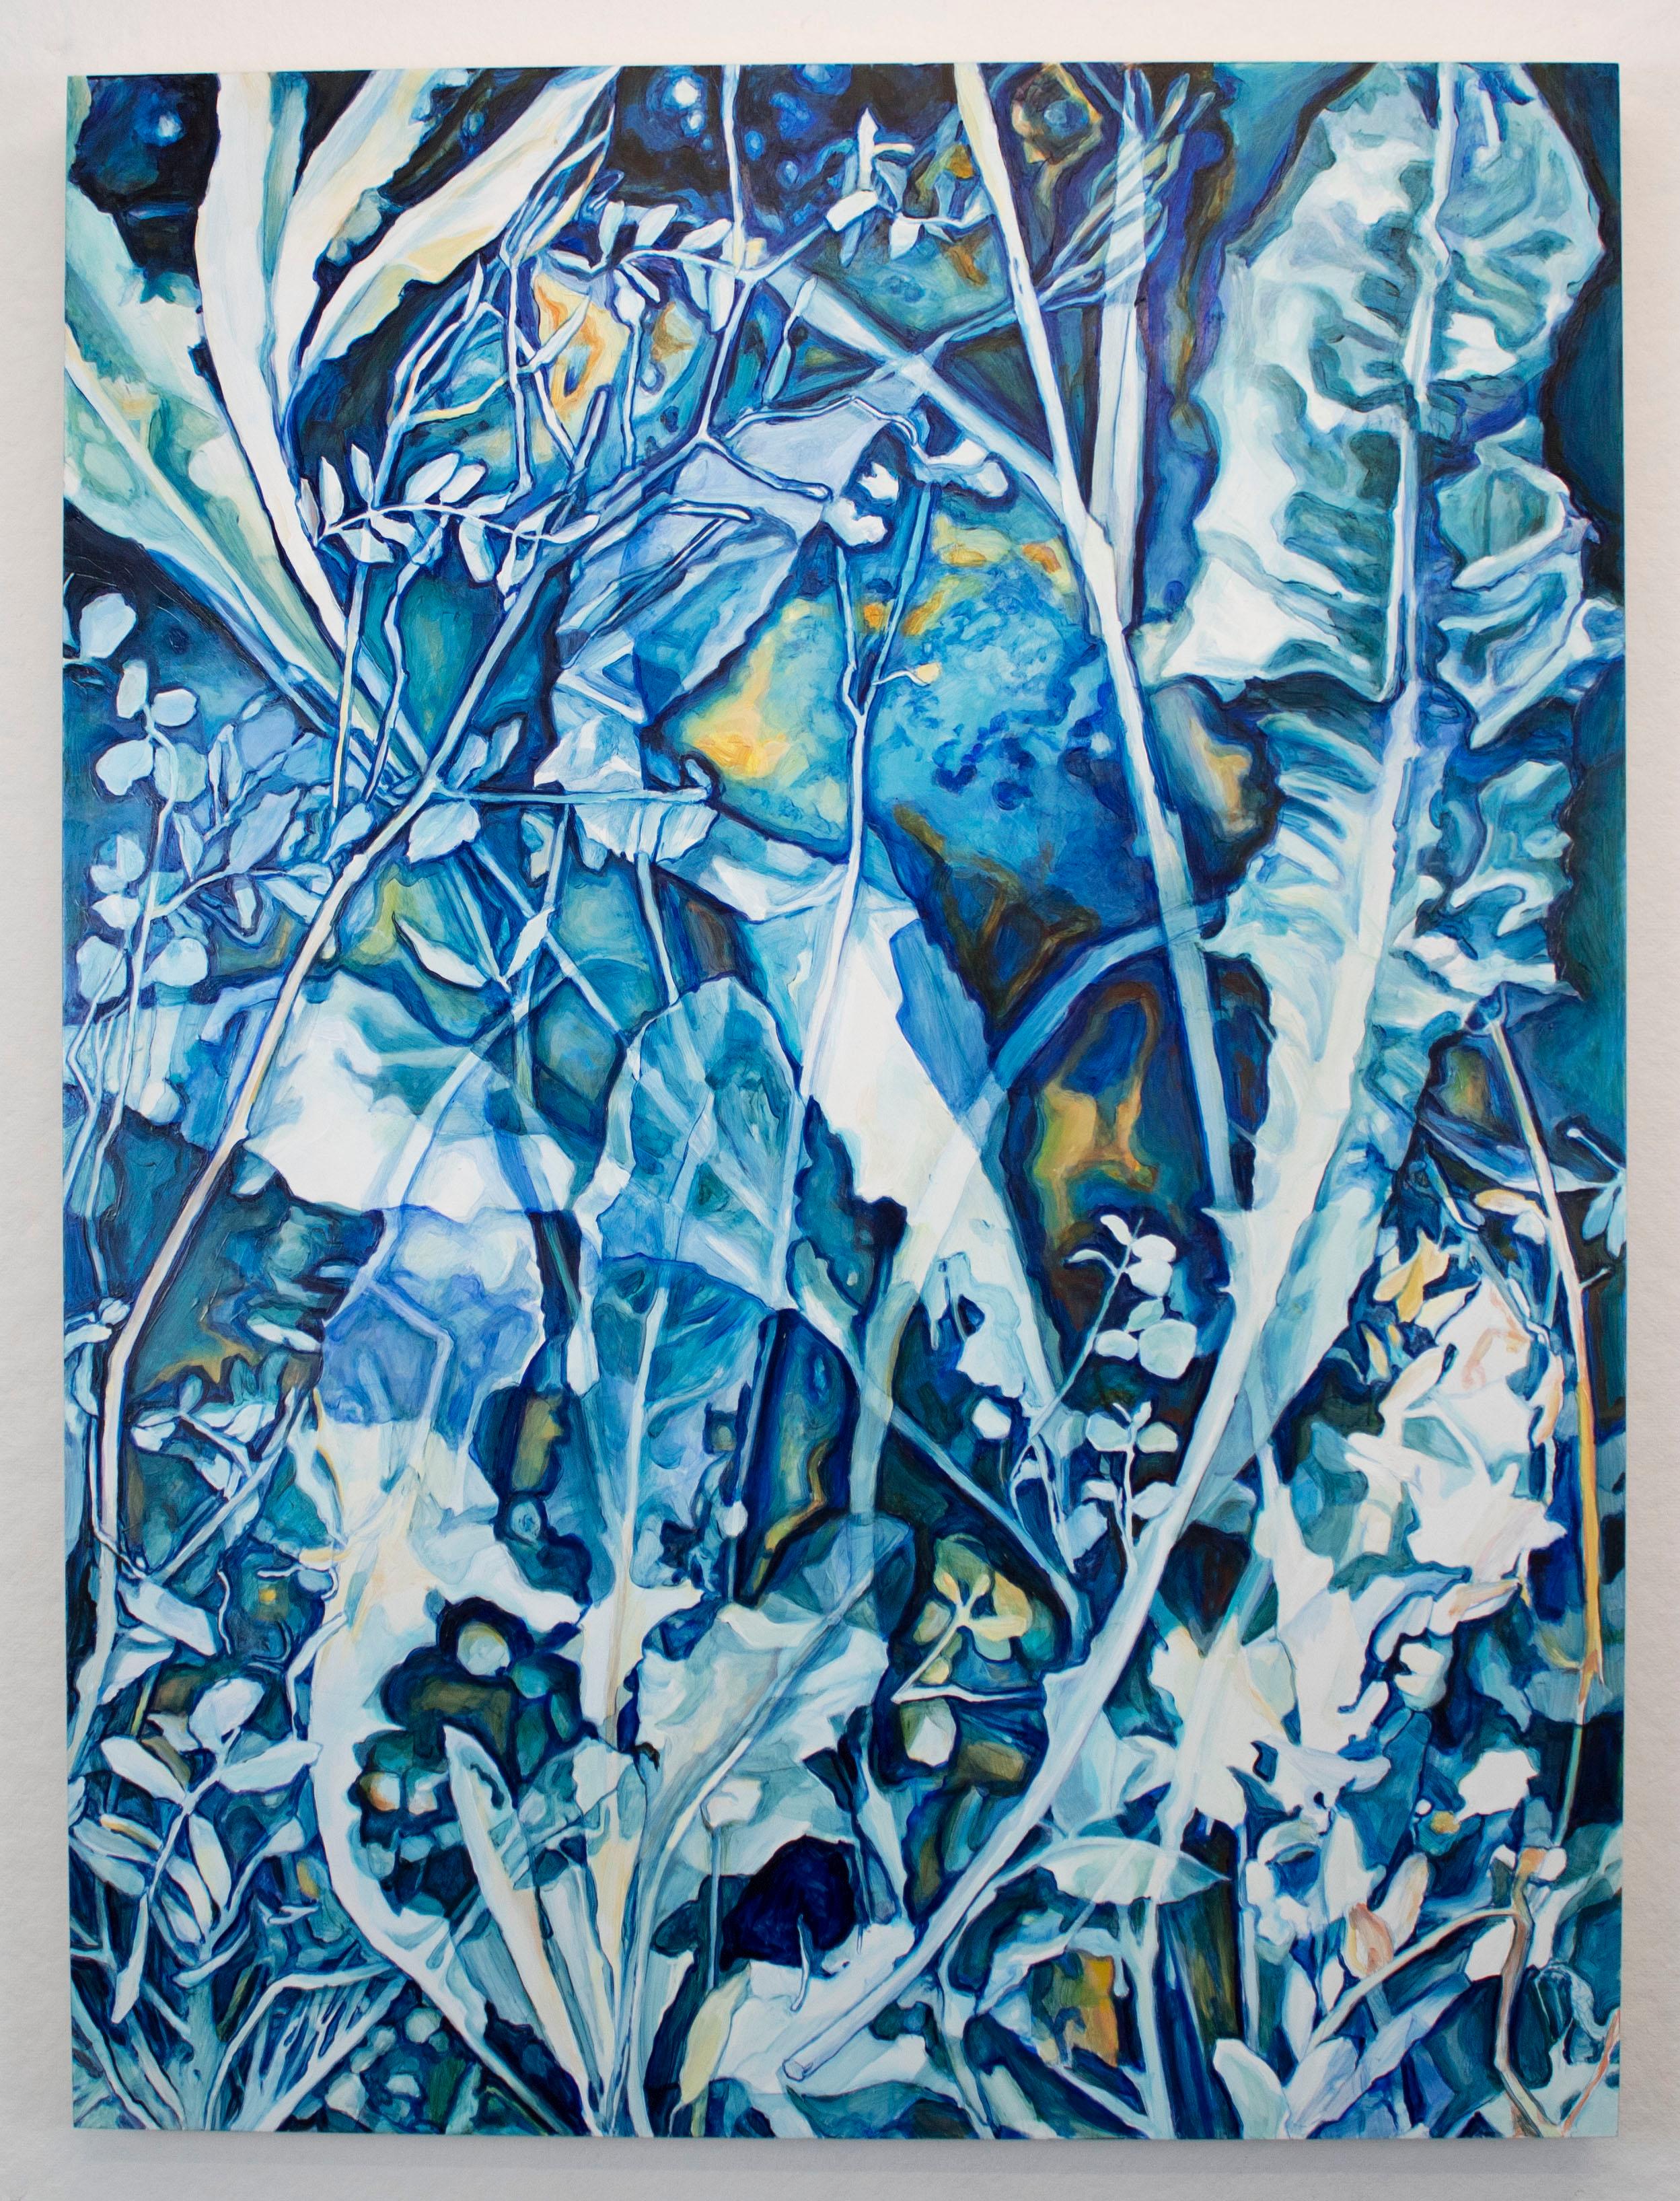 Cyanotype inspired diptych of lush blue and white botanicals interspersed with whispers of yellow. Electric Daydream, Diptych (2022) by Amanda Besl. Oil on board.